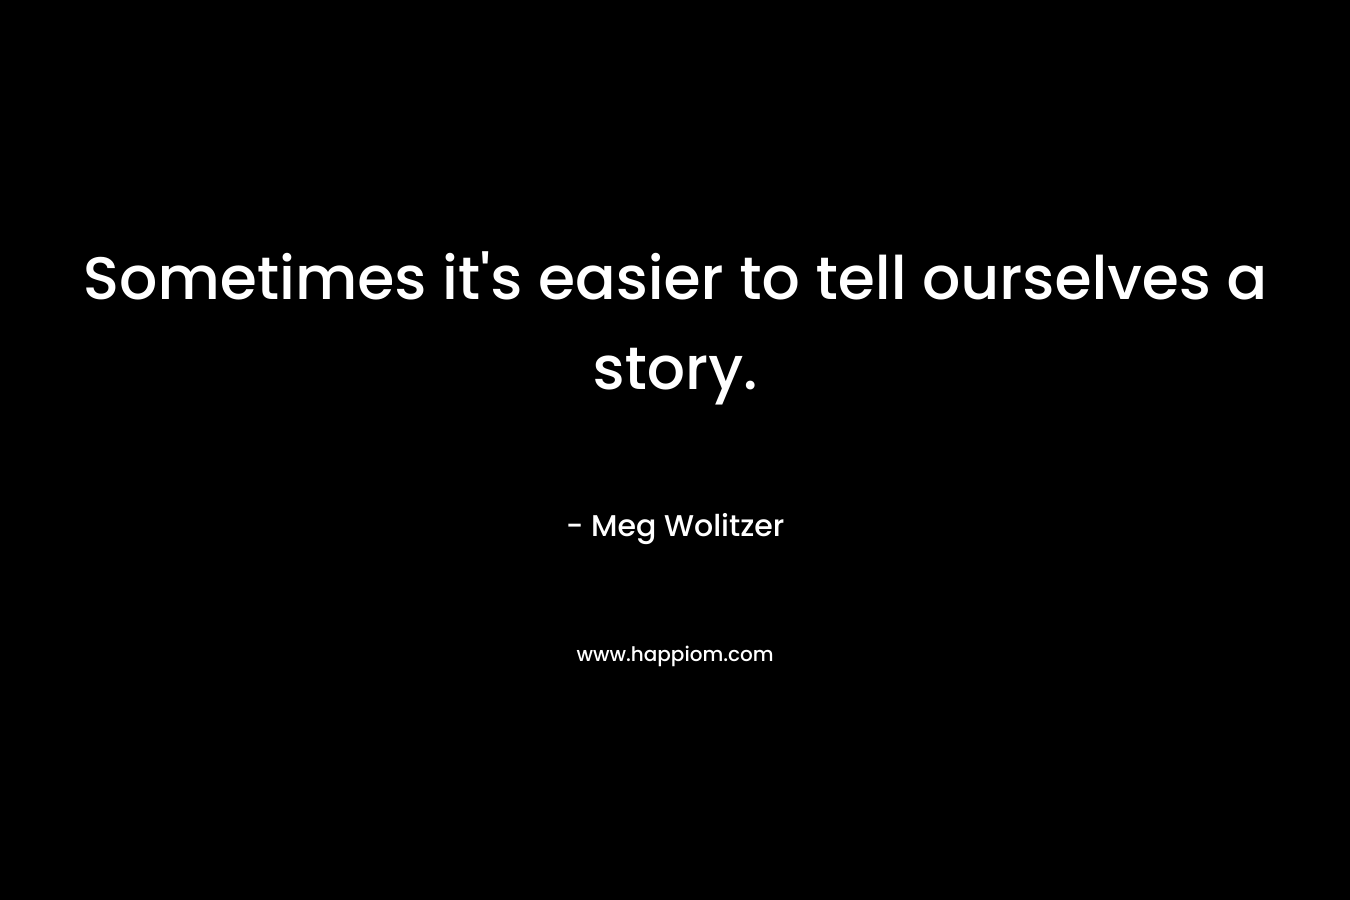 Sometimes it’s easier to tell ourselves a story. – Meg Wolitzer